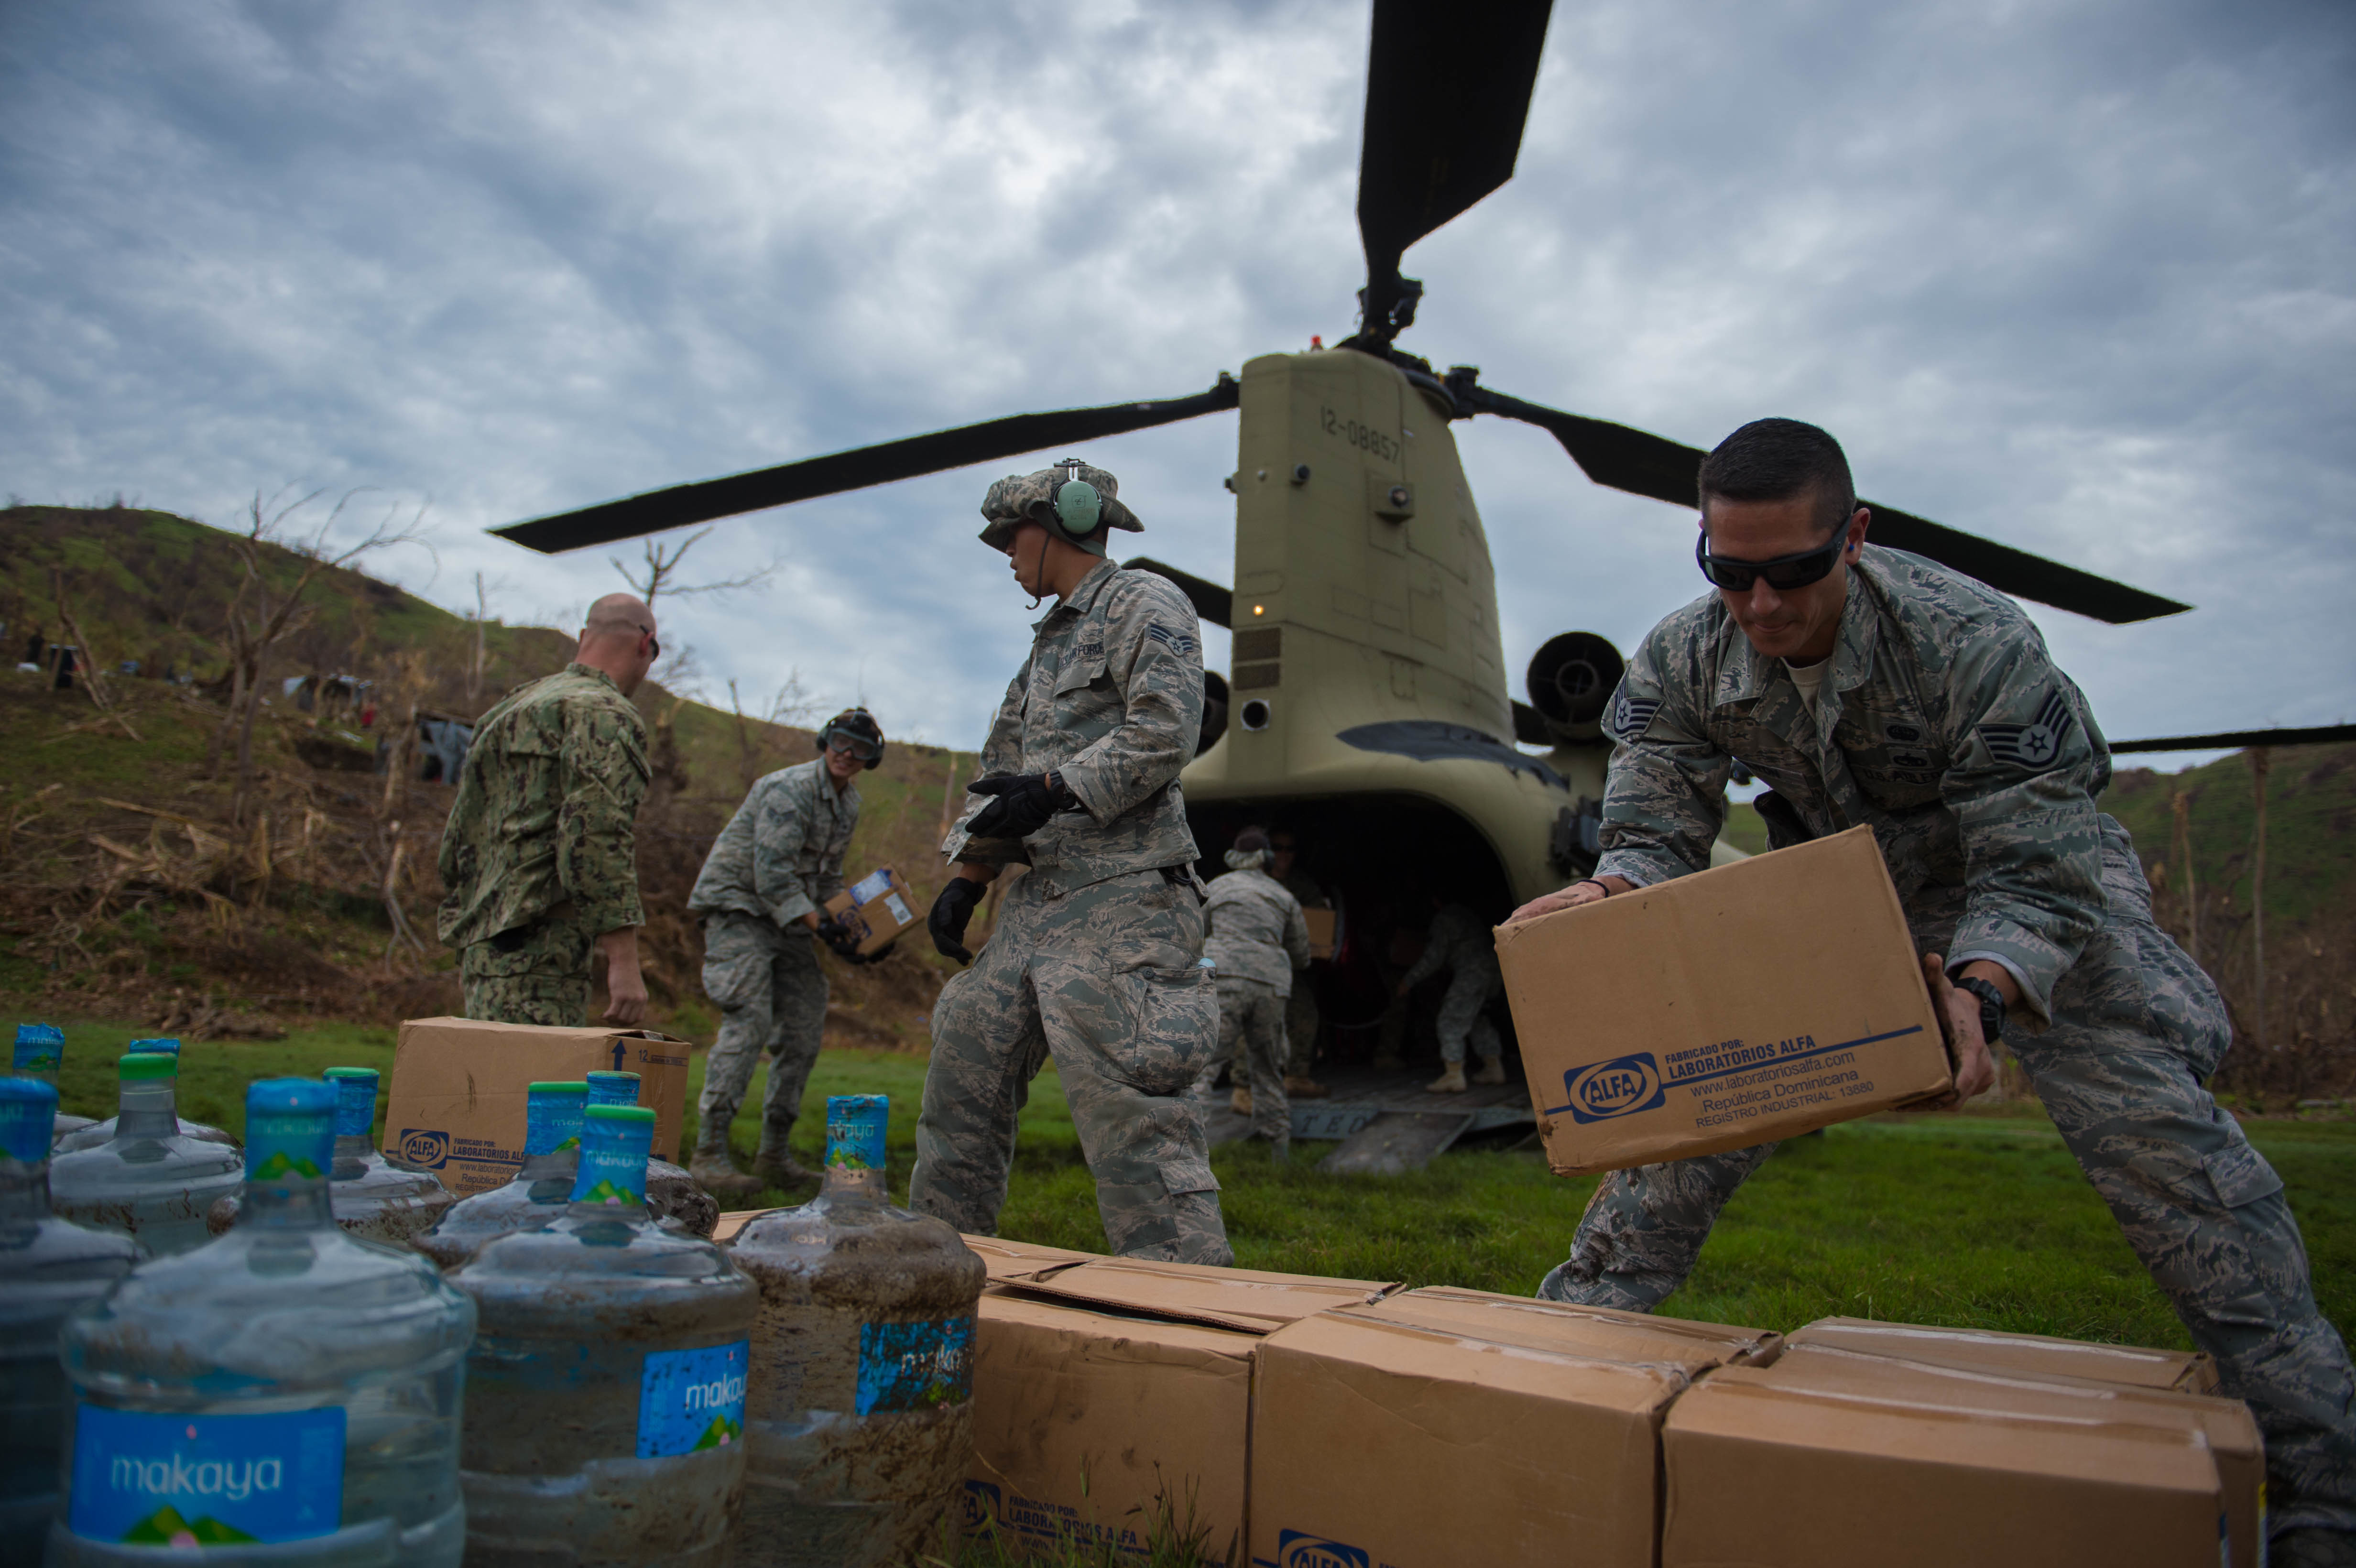 U.S. service members stack boxes of aid which and water while off loading a U.S. Army CH-47 Chinook during an aid relief mission Oct. 14, 2016 in Anse d'Hainault, Haiti. 